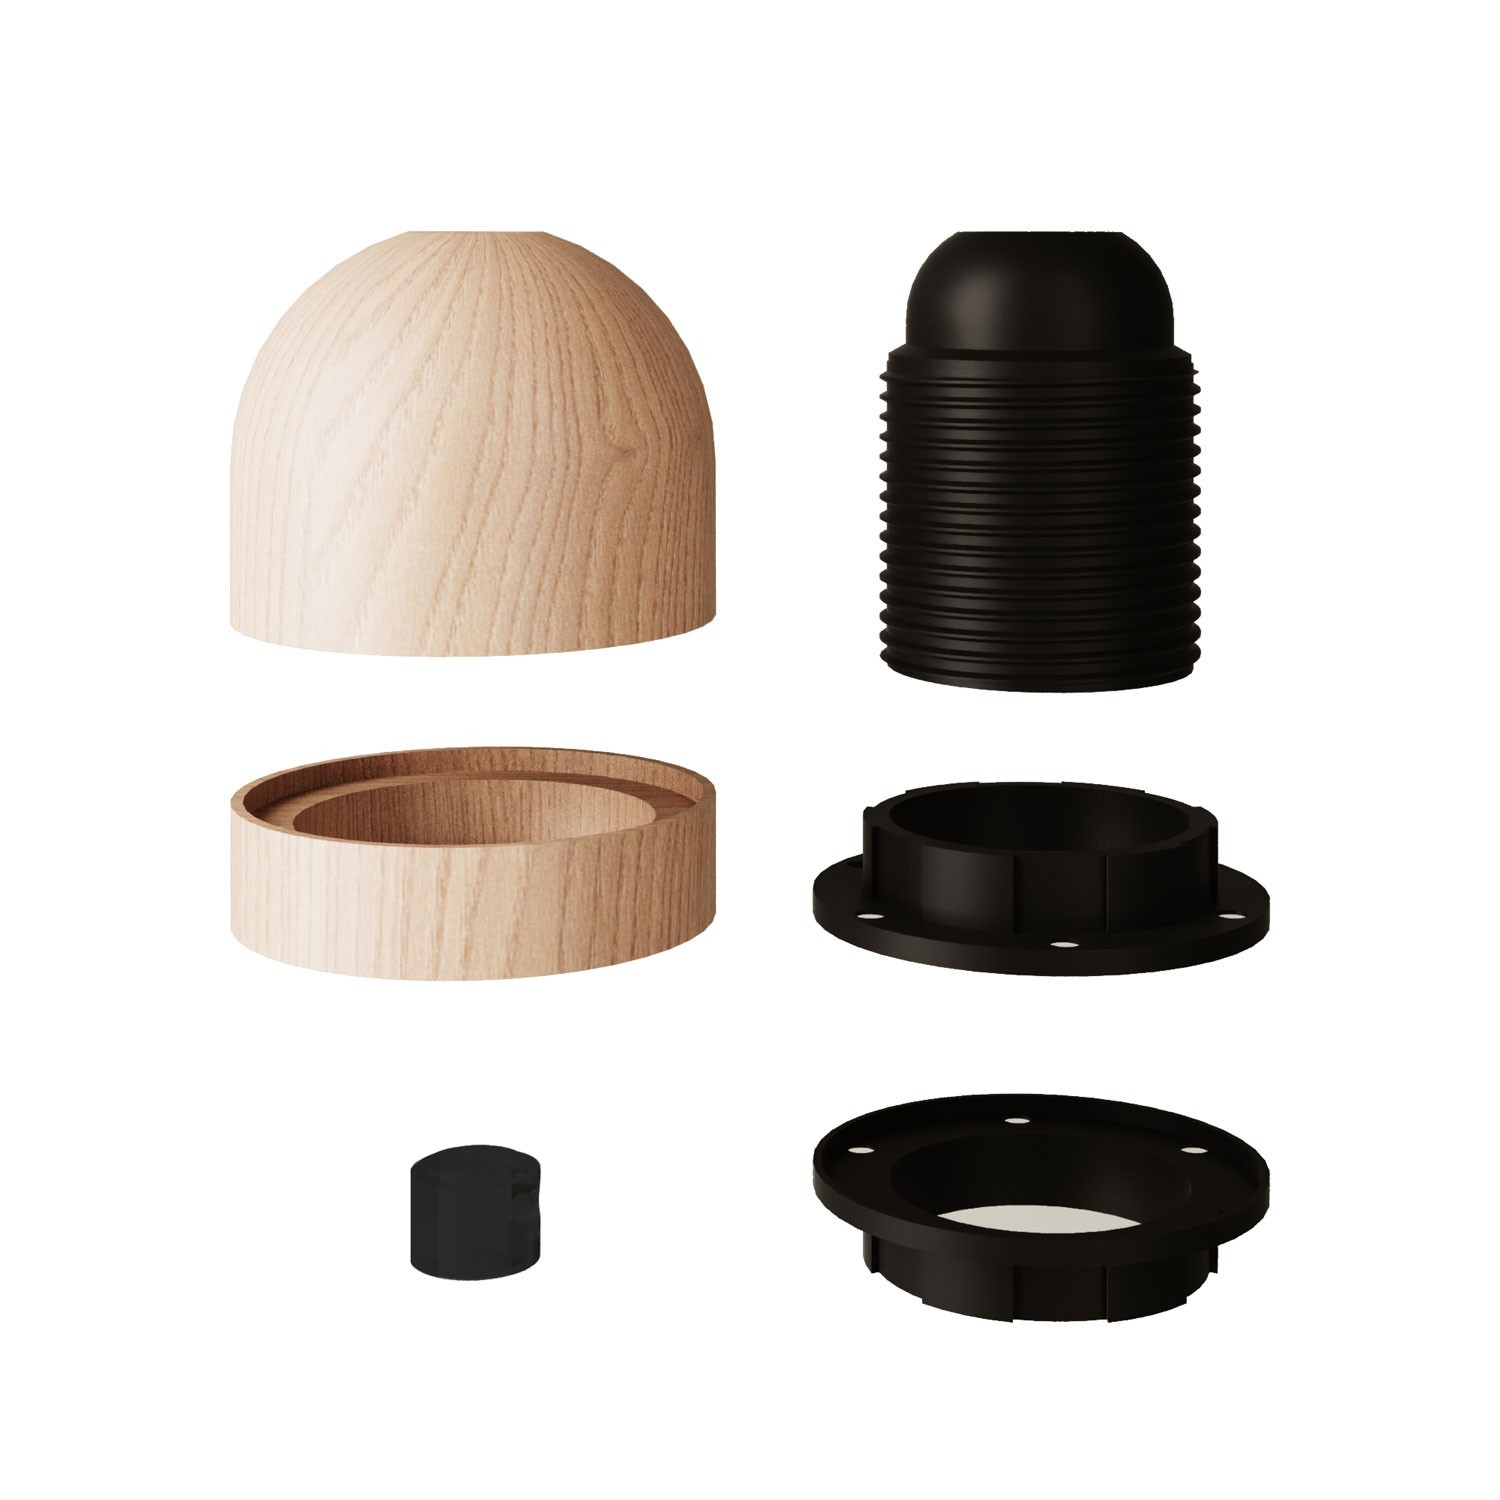 Wood E27 threaded hemispherical lamp holder kit with hidden cable clamp and ferrule cover for lampshade